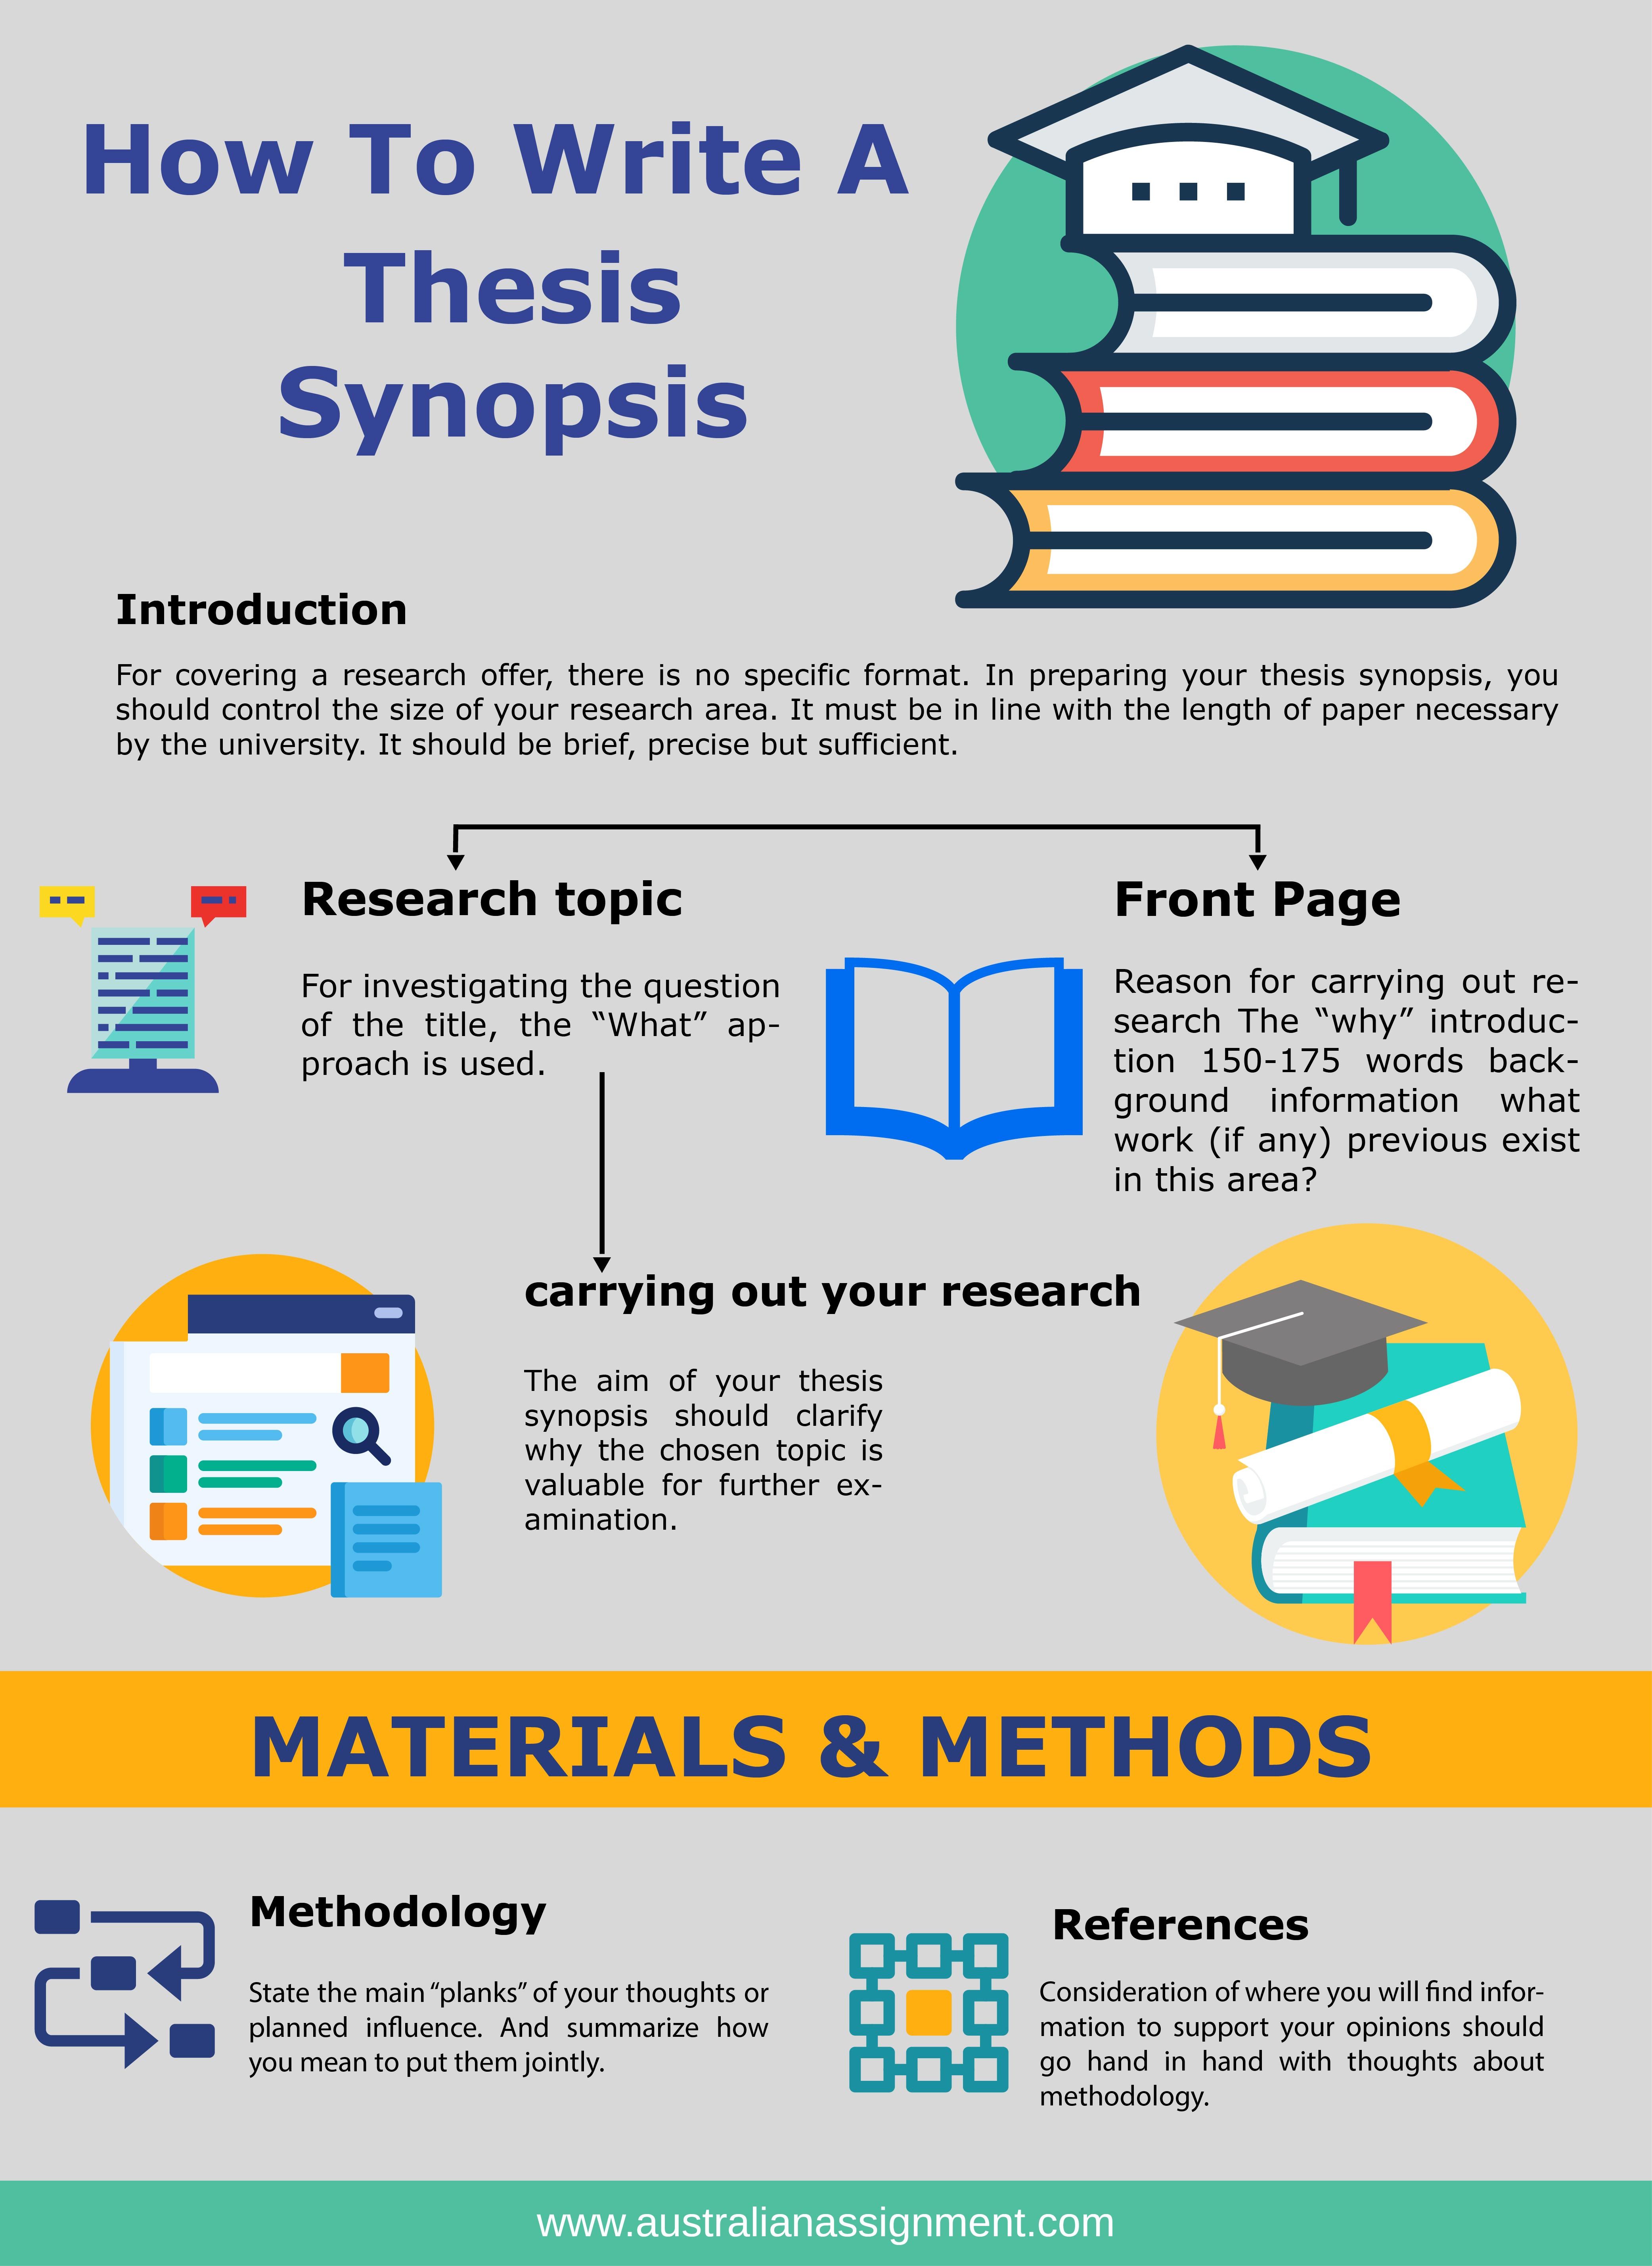 Write A Thesis Synopsis Synopsis Thesis Writing Services